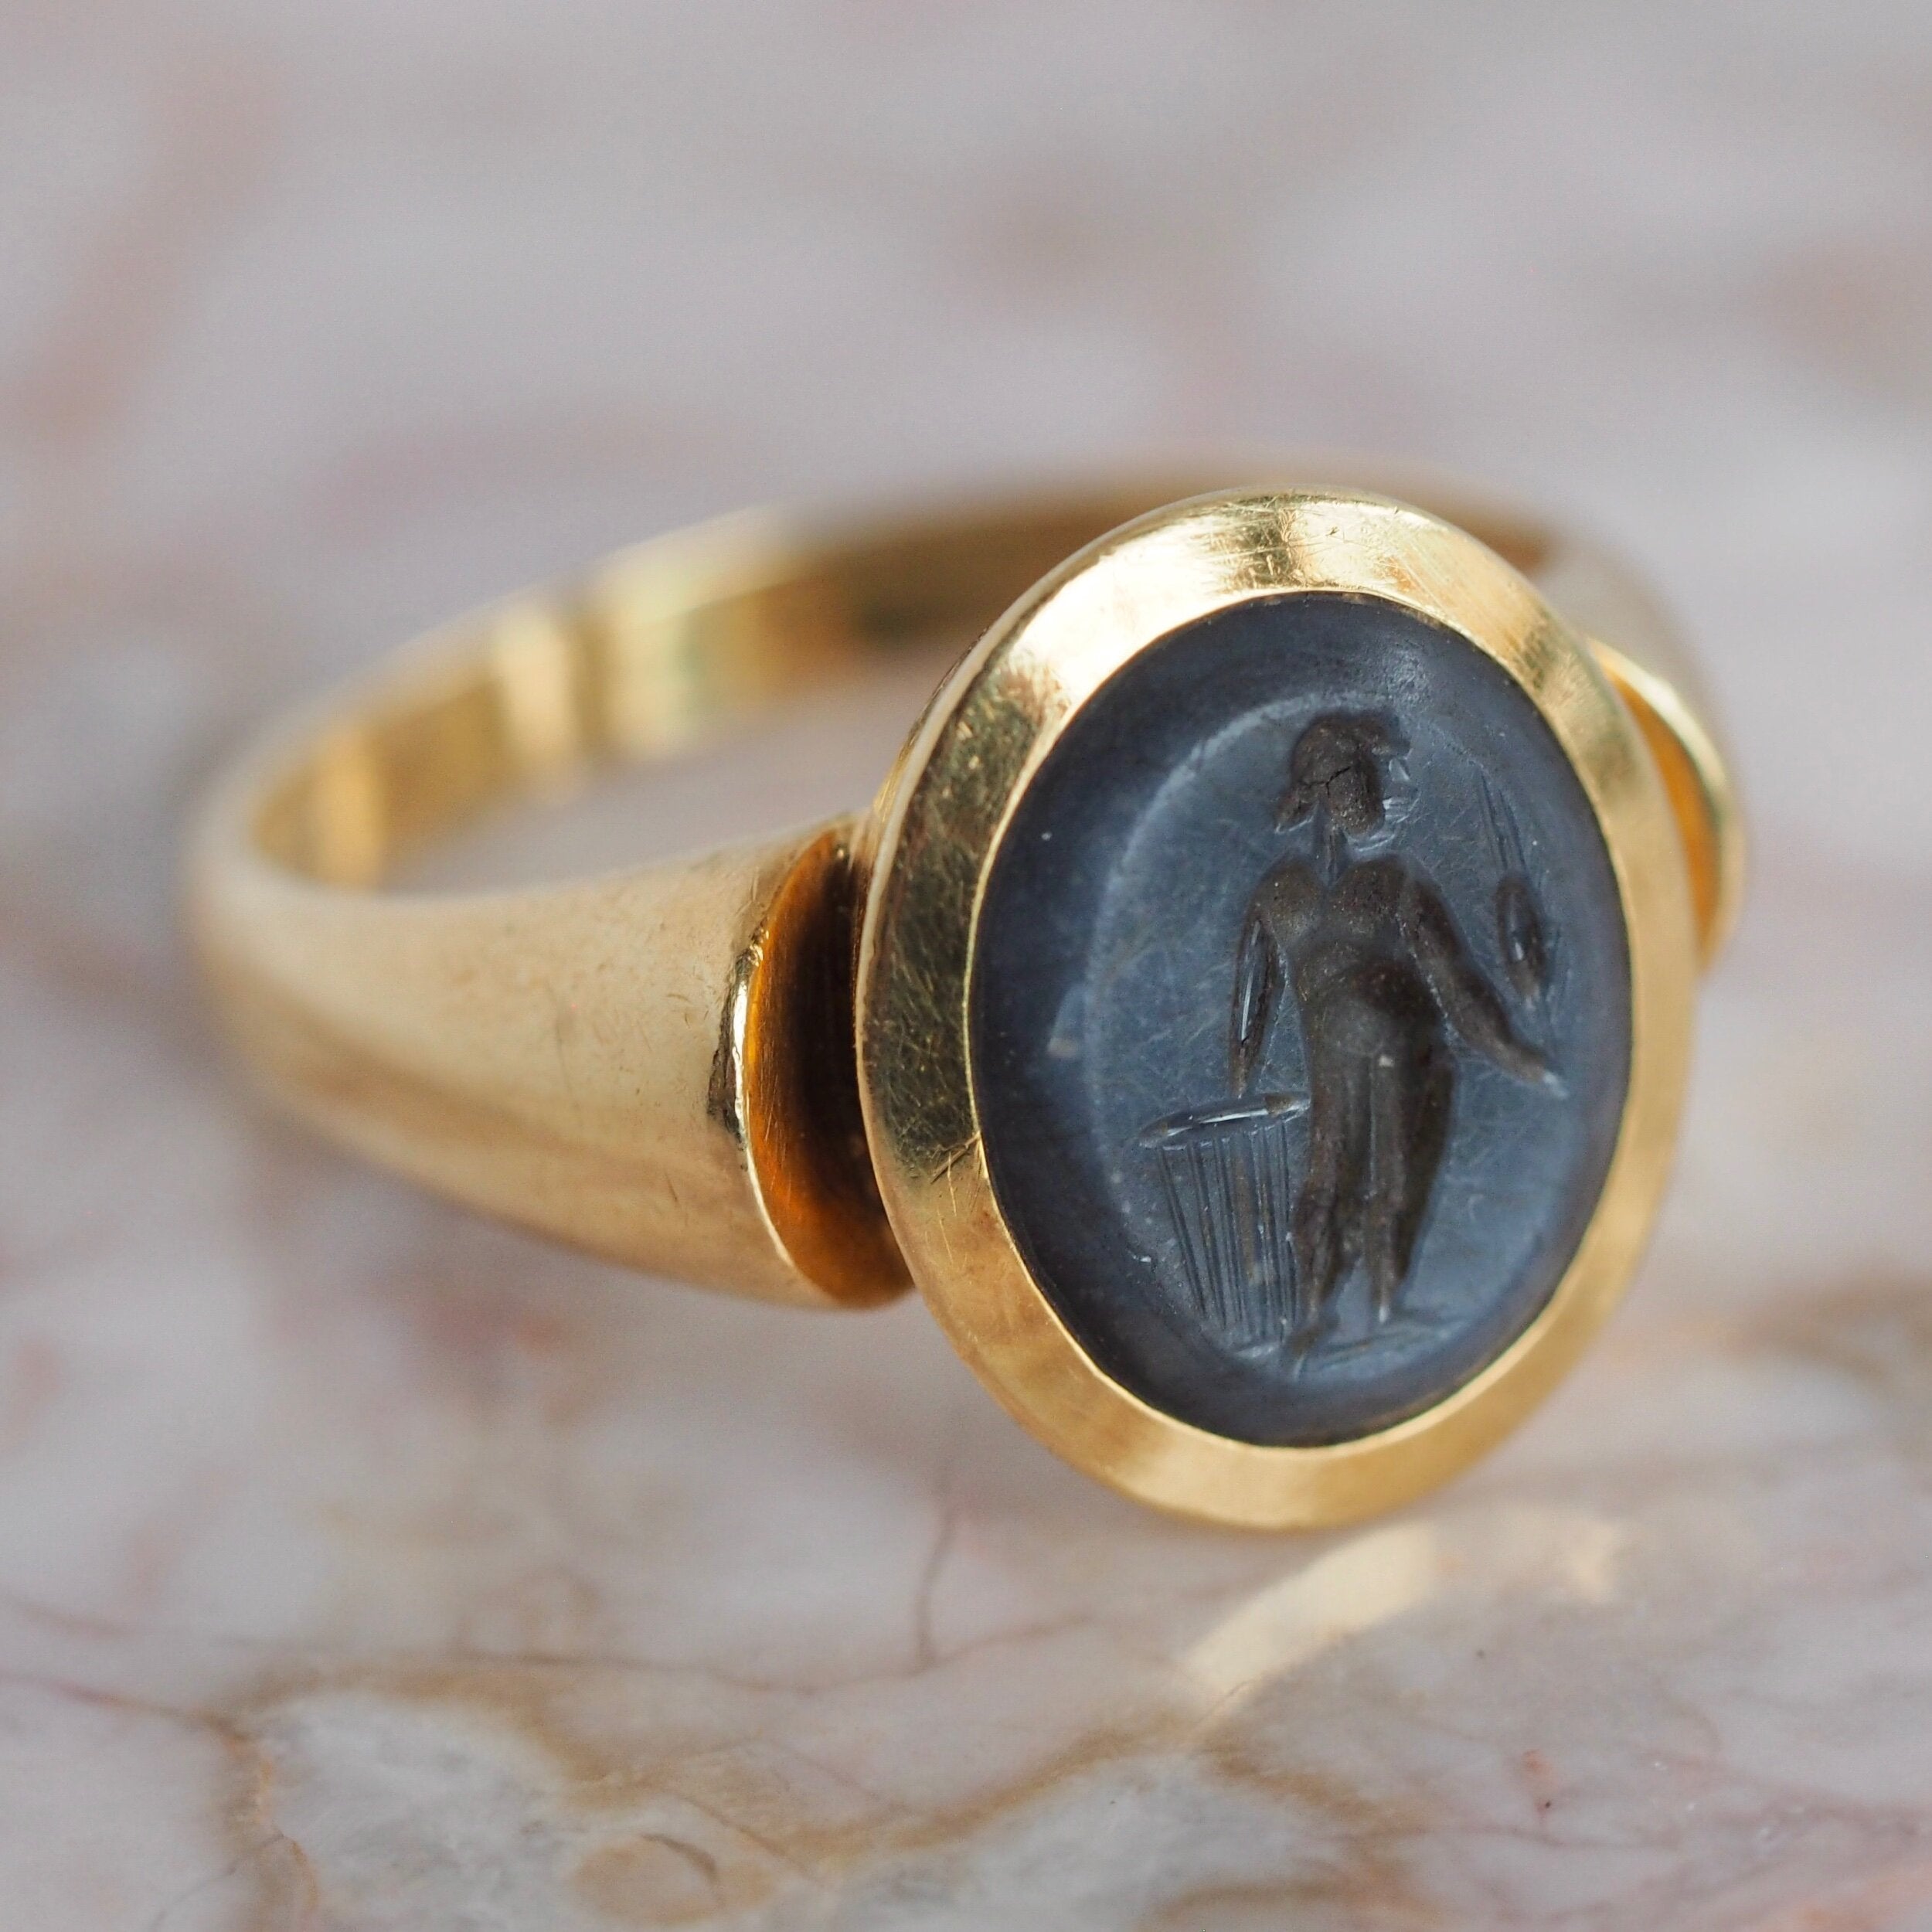 Vintage 18k Gold Ring with Ancient Agate Intaglio